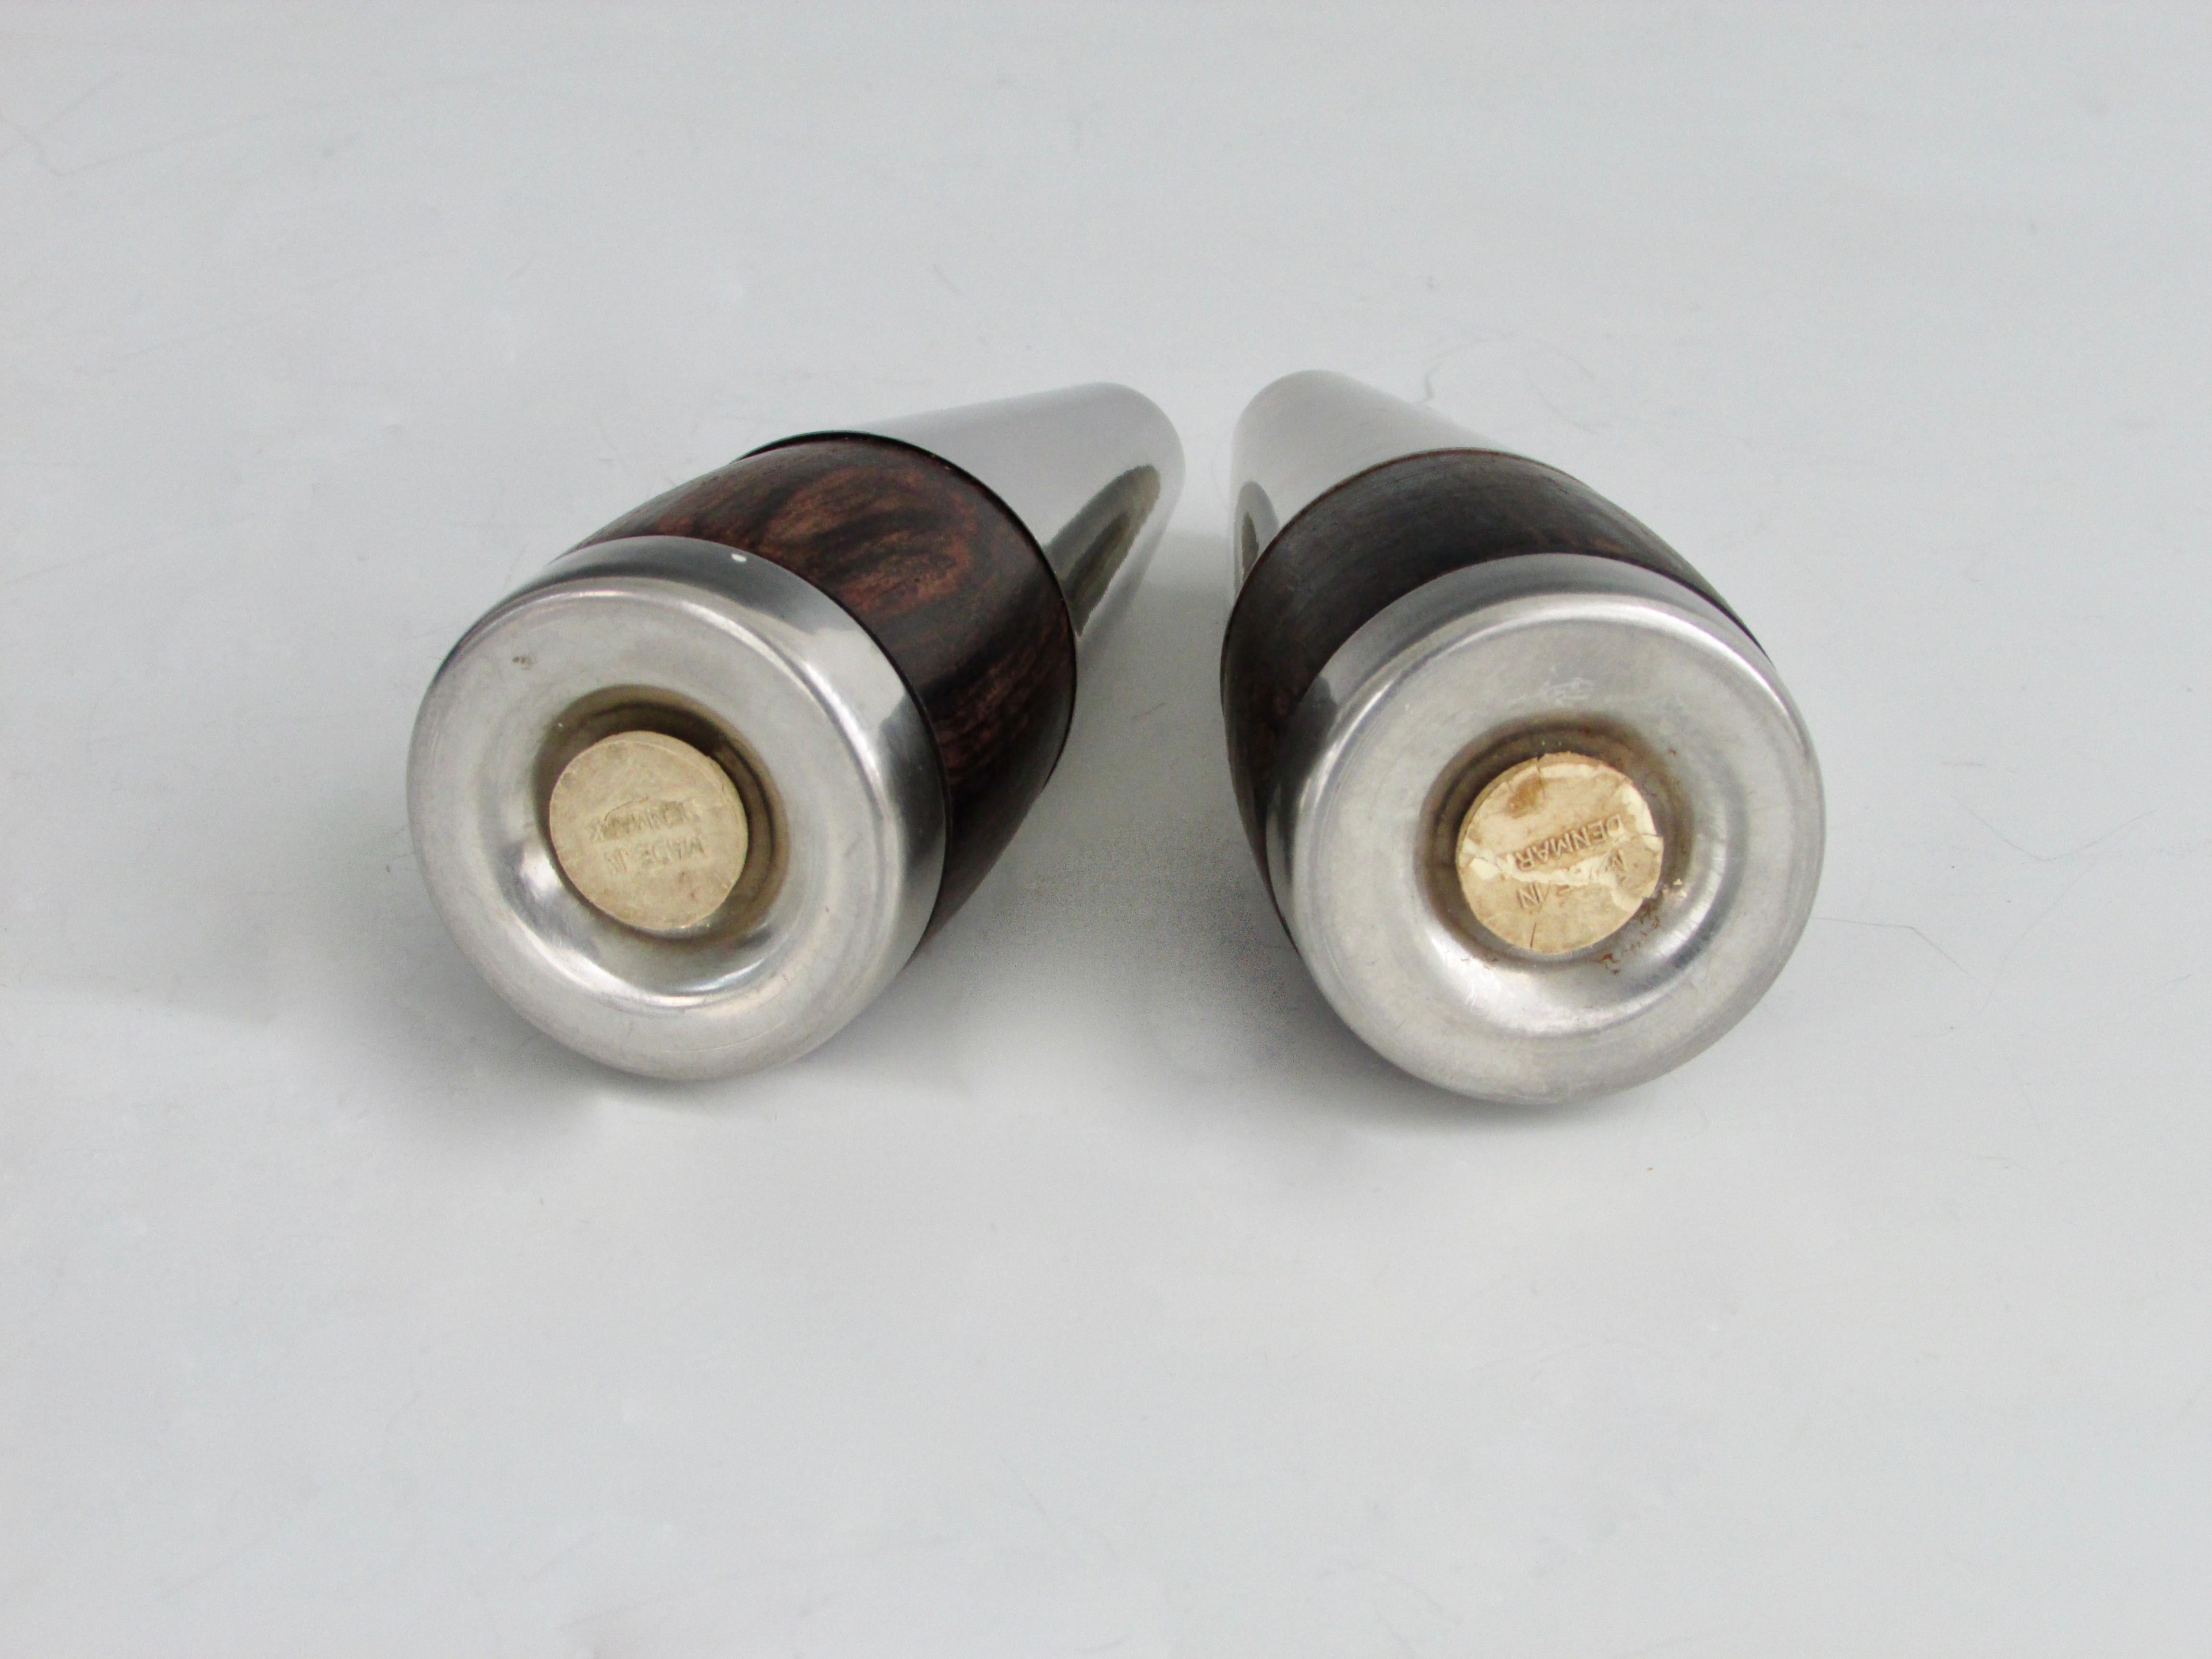 Stainless Steel on Rosewood Modernist Salt and Pepper Shakers Marked Denmark In Good Condition For Sale In Ferndale, MI